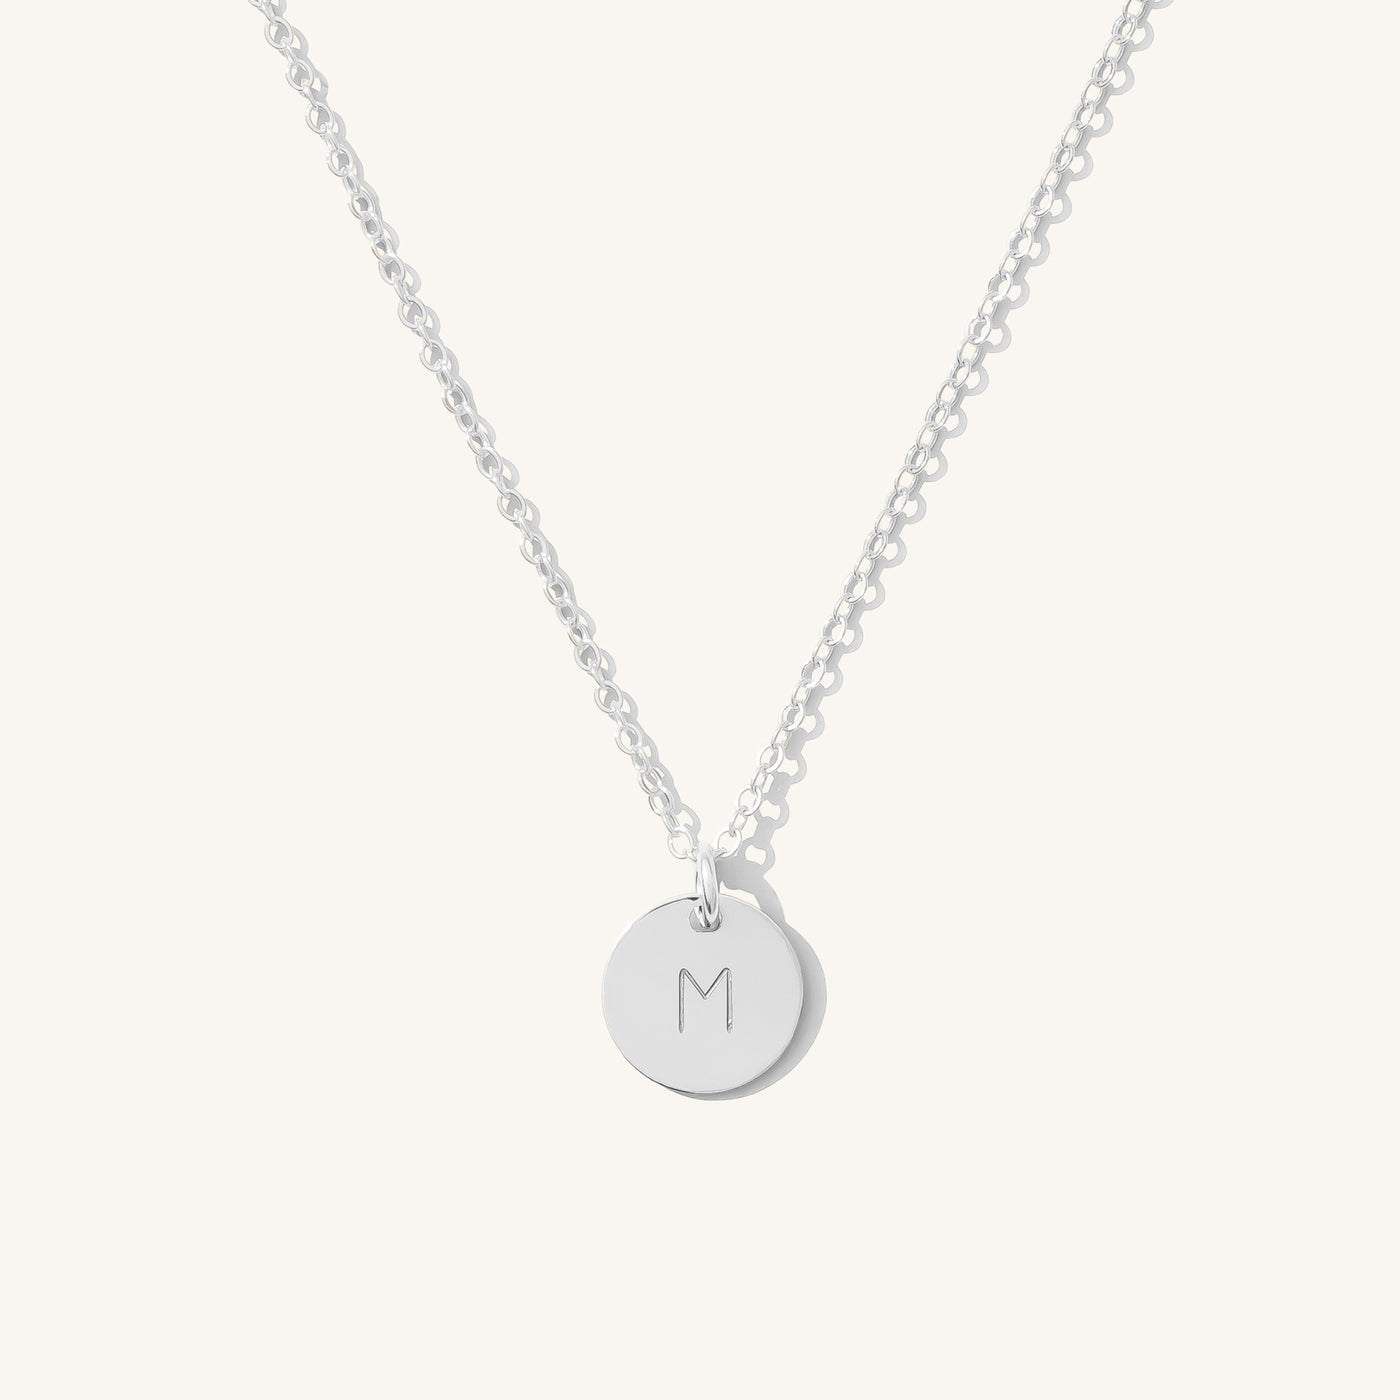 M Dainty Initial Necklace